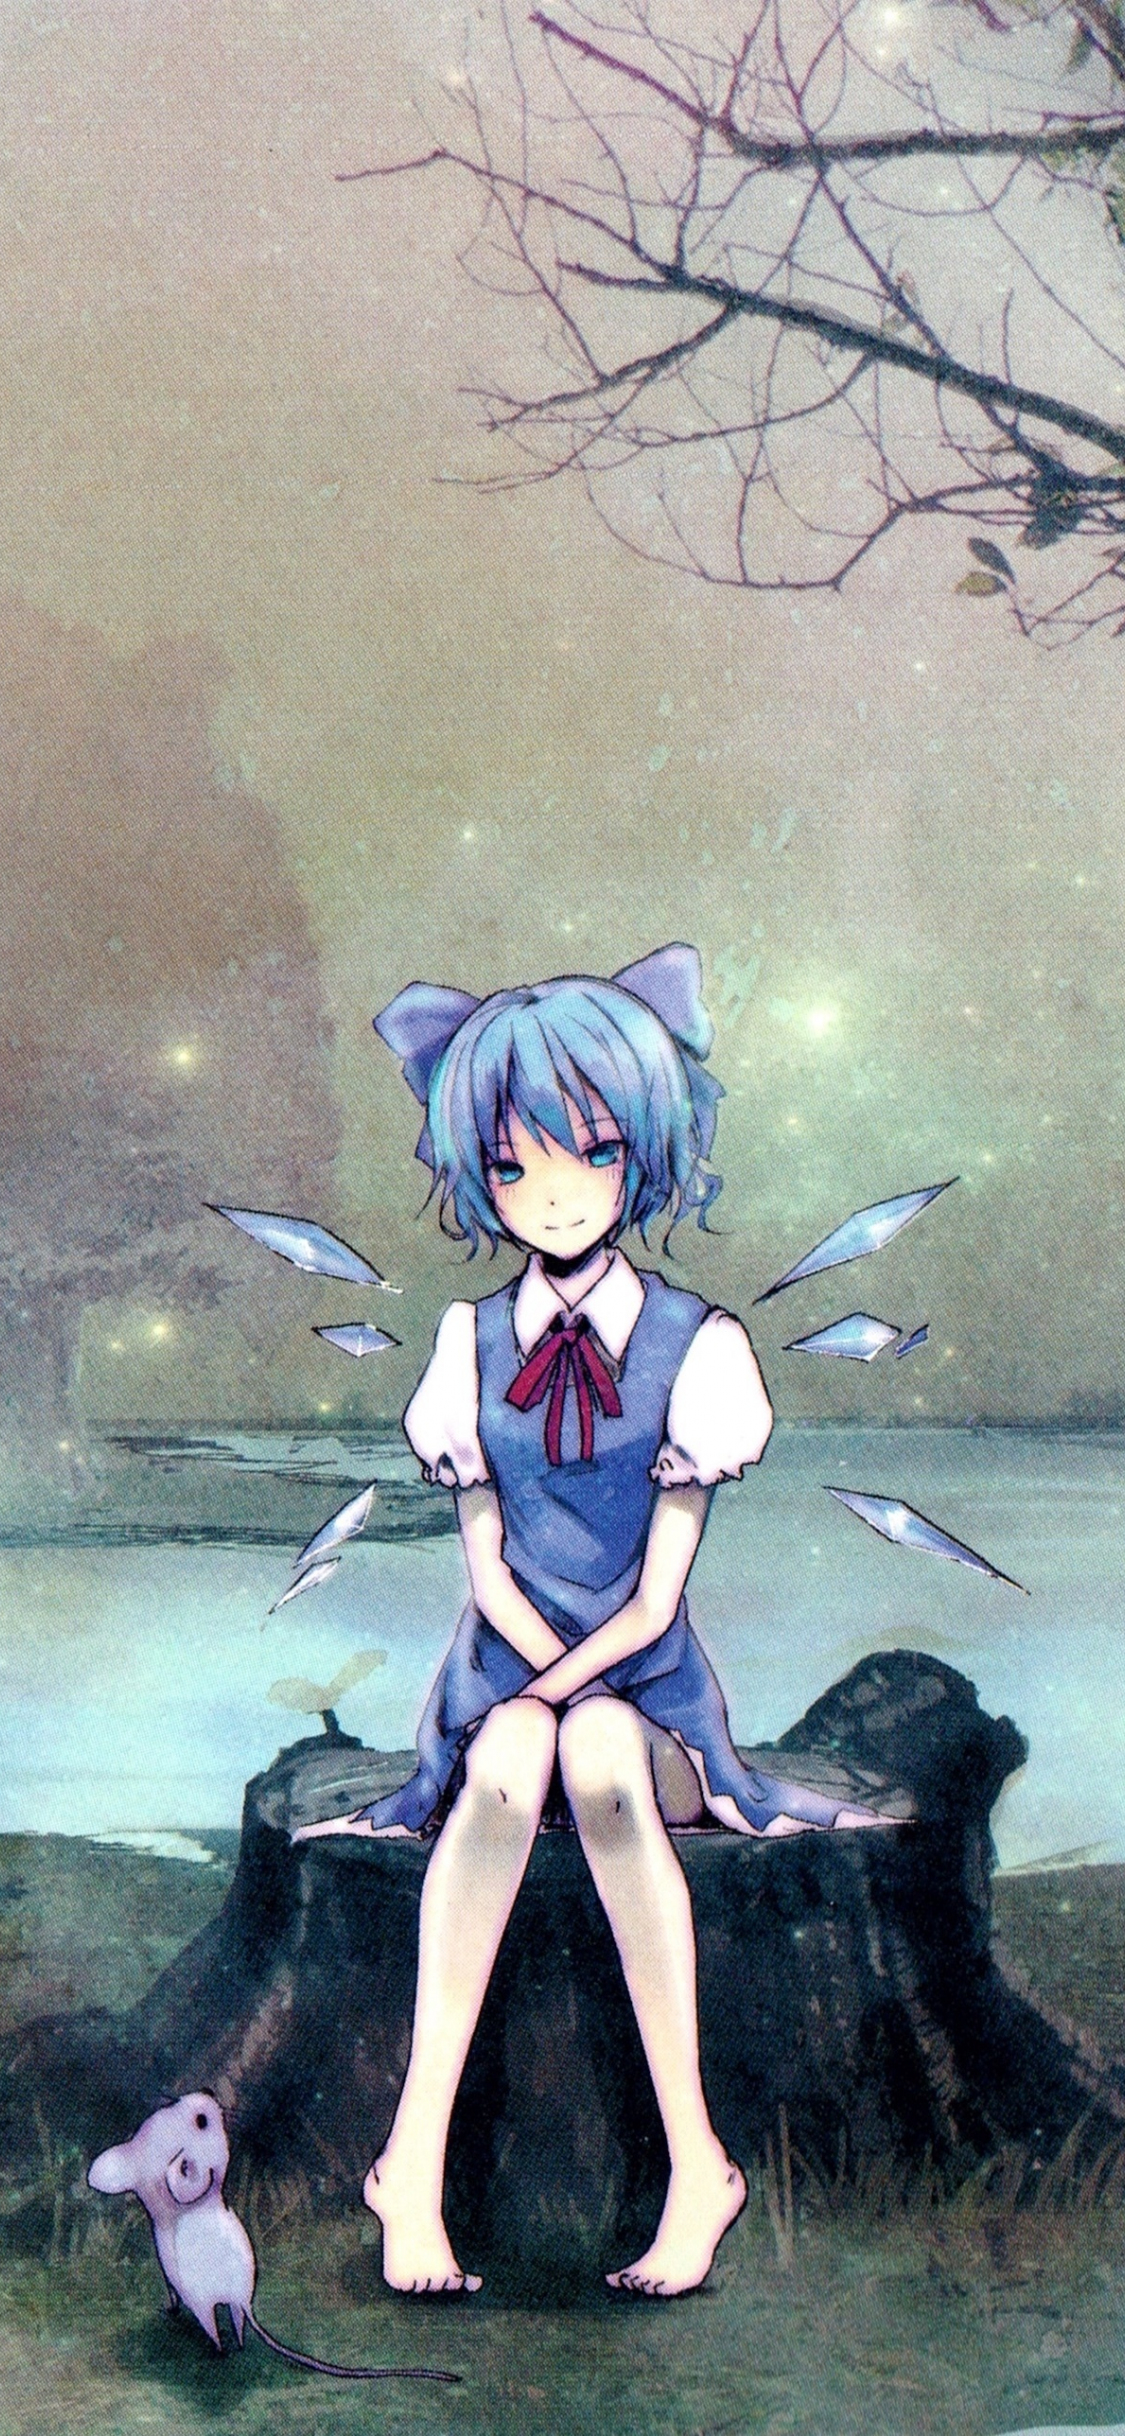 Download Cirno Touhou wallpapers for mobile phone free Cirno  Touhou HD pictures